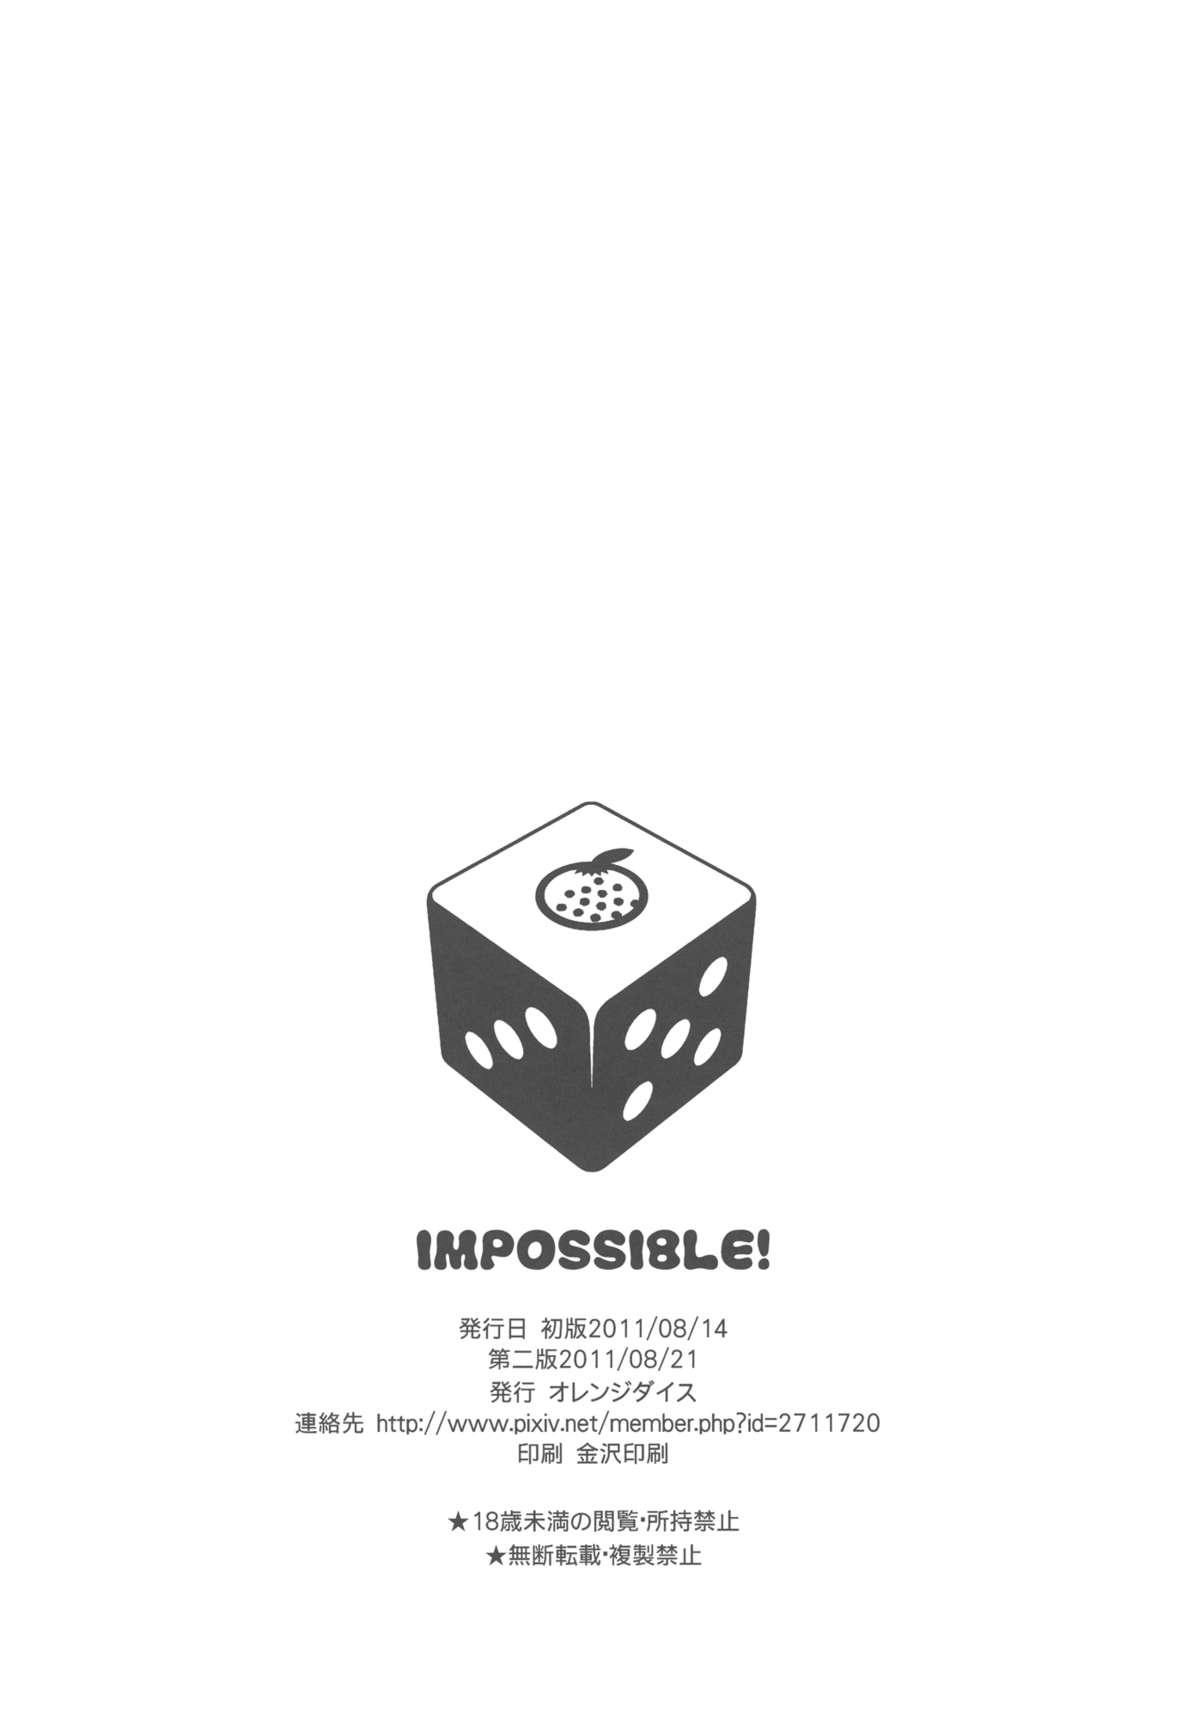 IMPOSSIBLE! 35